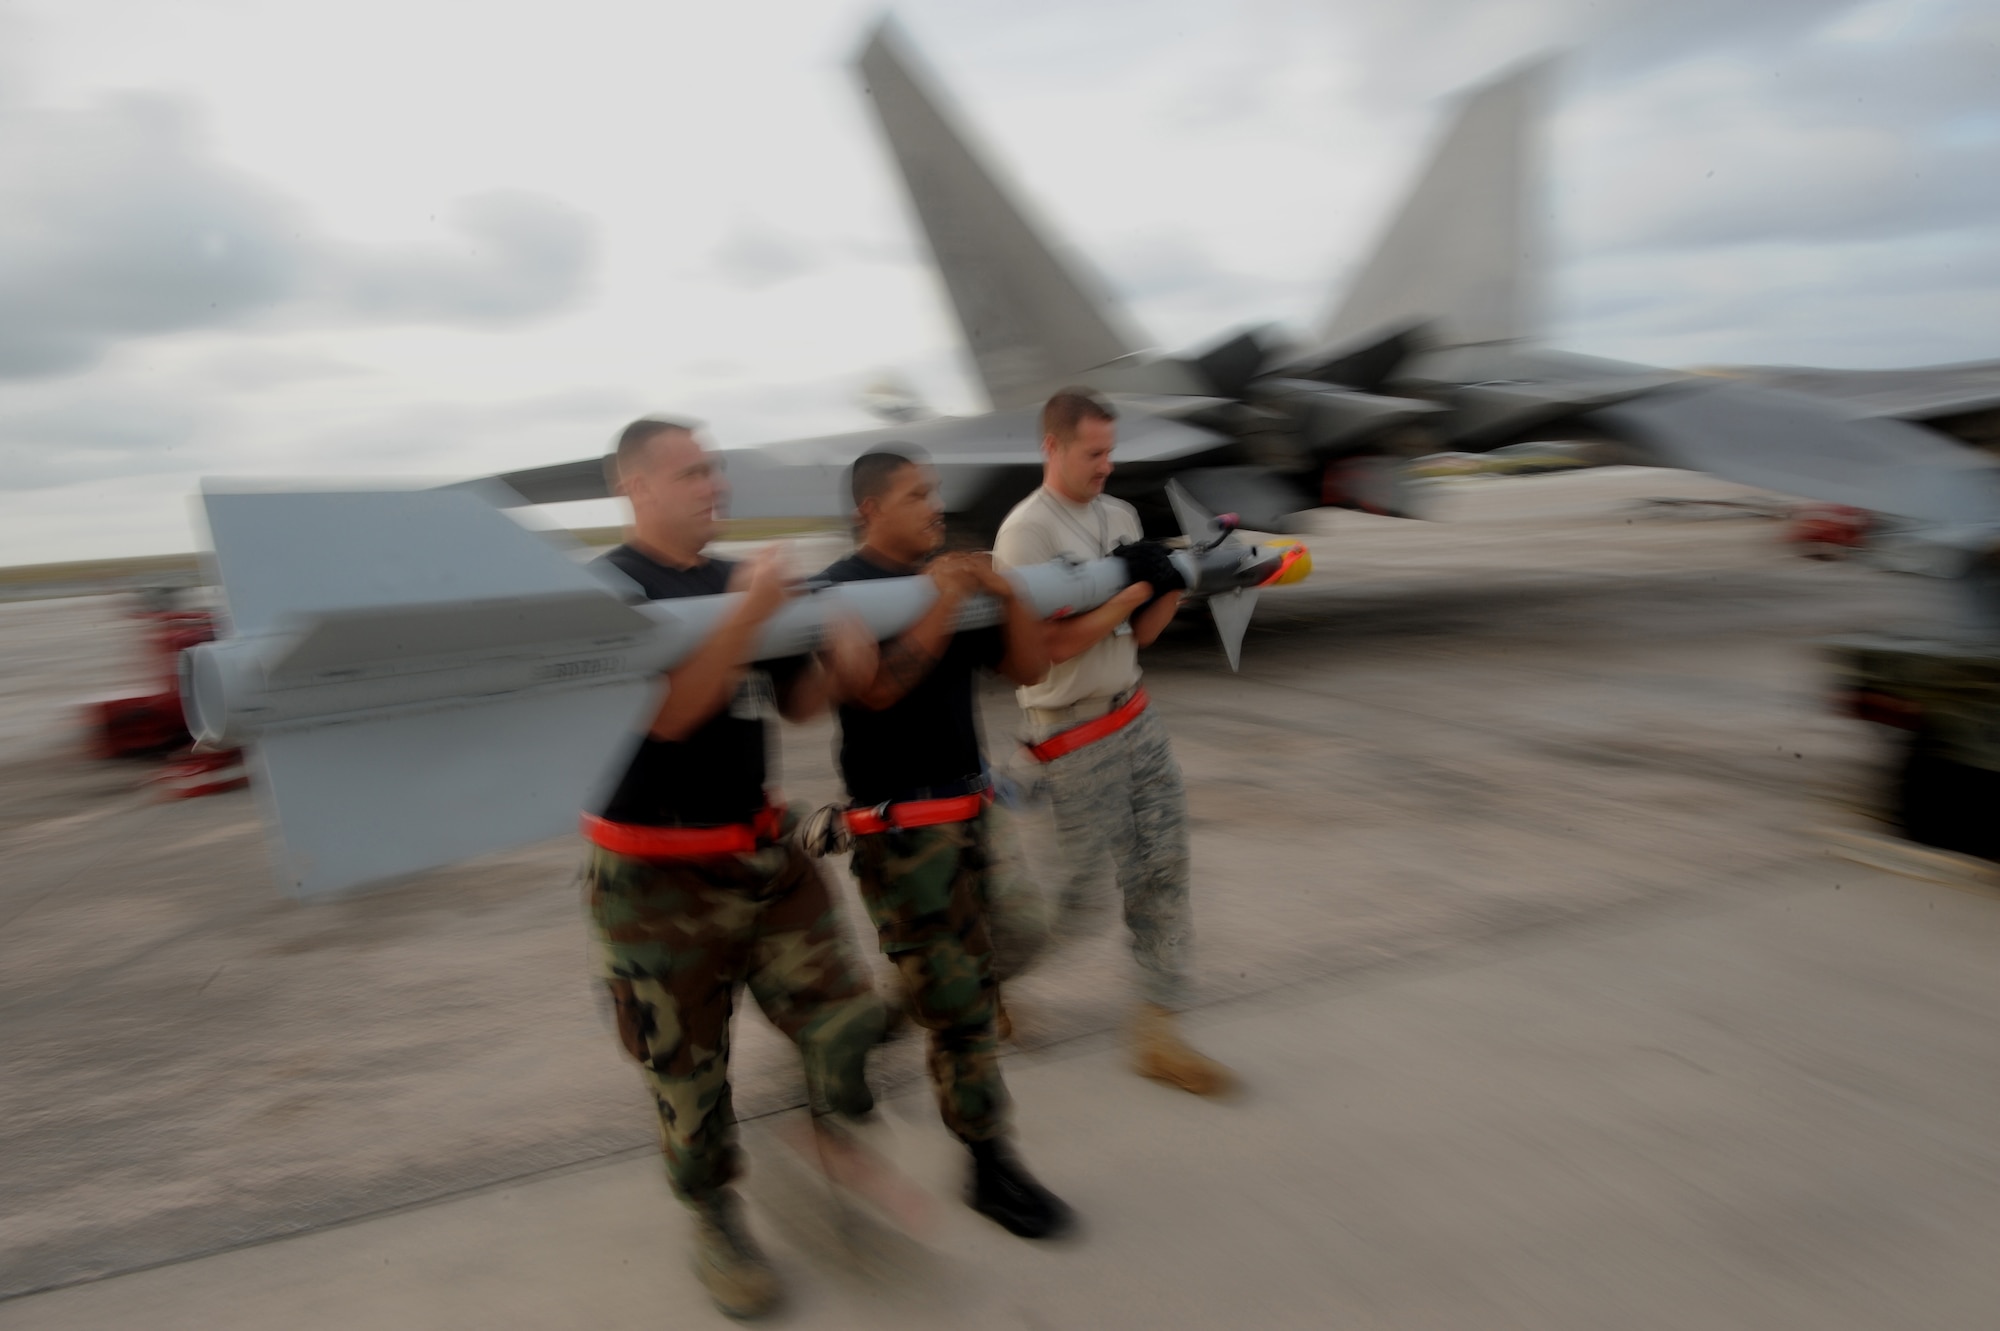 (L-R) Staff Sgt. Luke Vetter, Senior Airman Matias Castro and Staff Sgt. Steve Nehls load an AIM-9 (CATM) captive air training missile March 19 at Andersen Air Force Base, Guam during exercise Jungle Shield. The surveillance and control of U.S. airspace in the Pacific Commands Area of Responsibility remains a prime mission focus for the men and women of the 13th Air Force. The Raptors are deployed from Elmendorf Air Force Base, Alaska to Guam as the 90th Expeditionary Fighter Squadron for three months as the Pacific's Theater Security Package. (U.S. Air Force photo/ Master Sgt. Kevin J. Gruenwald) released      